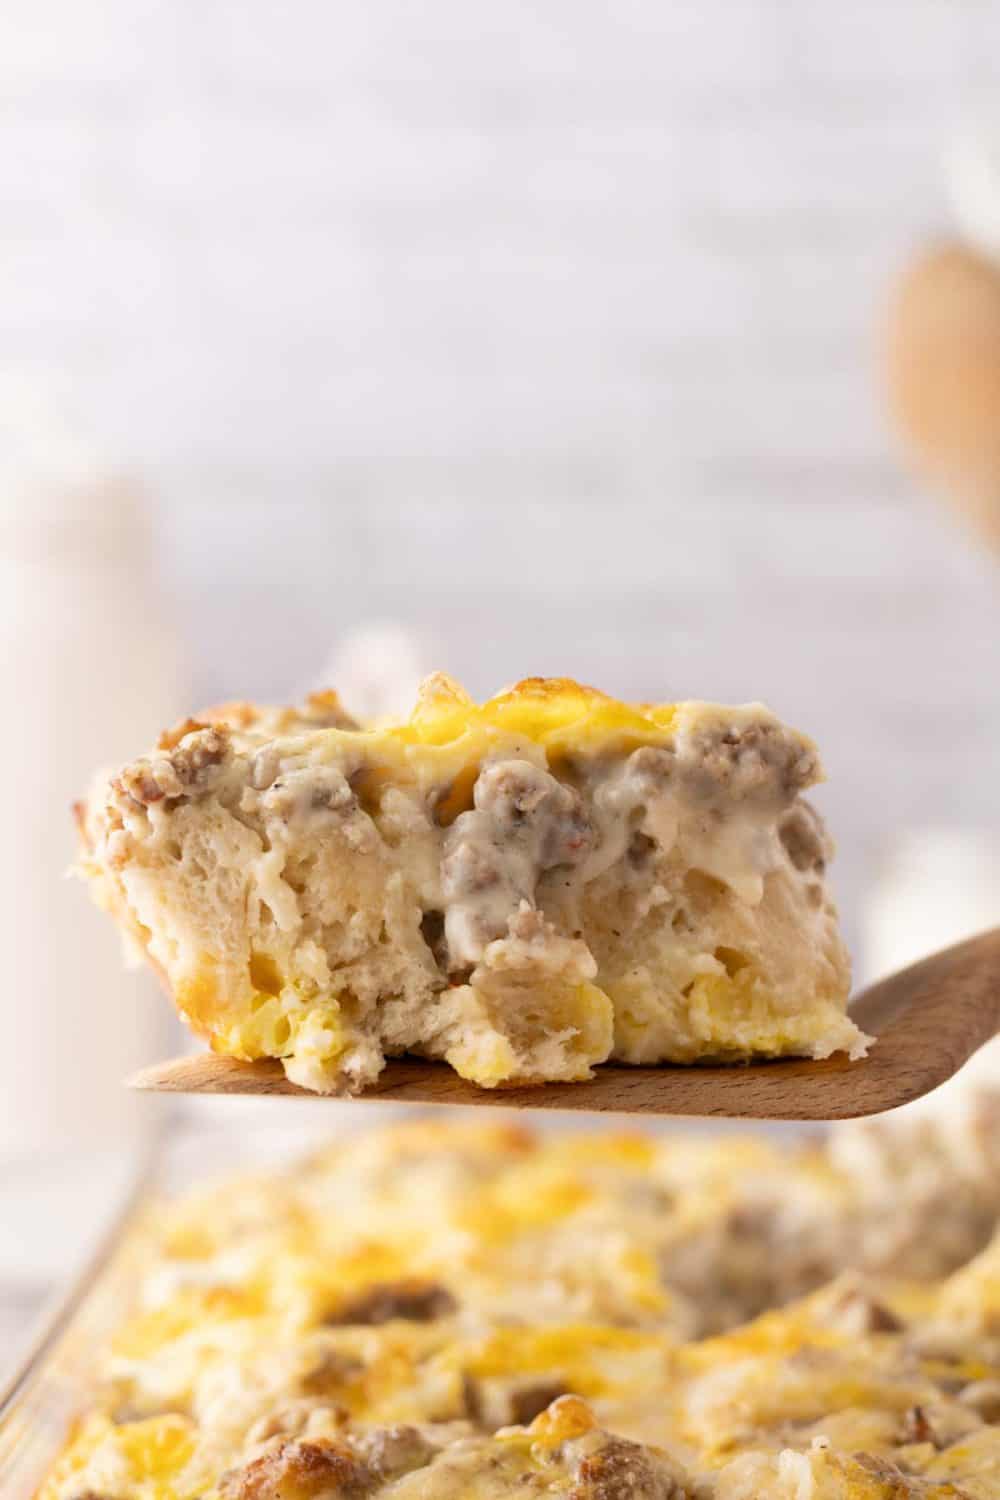 biscuits and gravy casserole recipe in a 9x12 dish with a square serving on a wooden spatula.